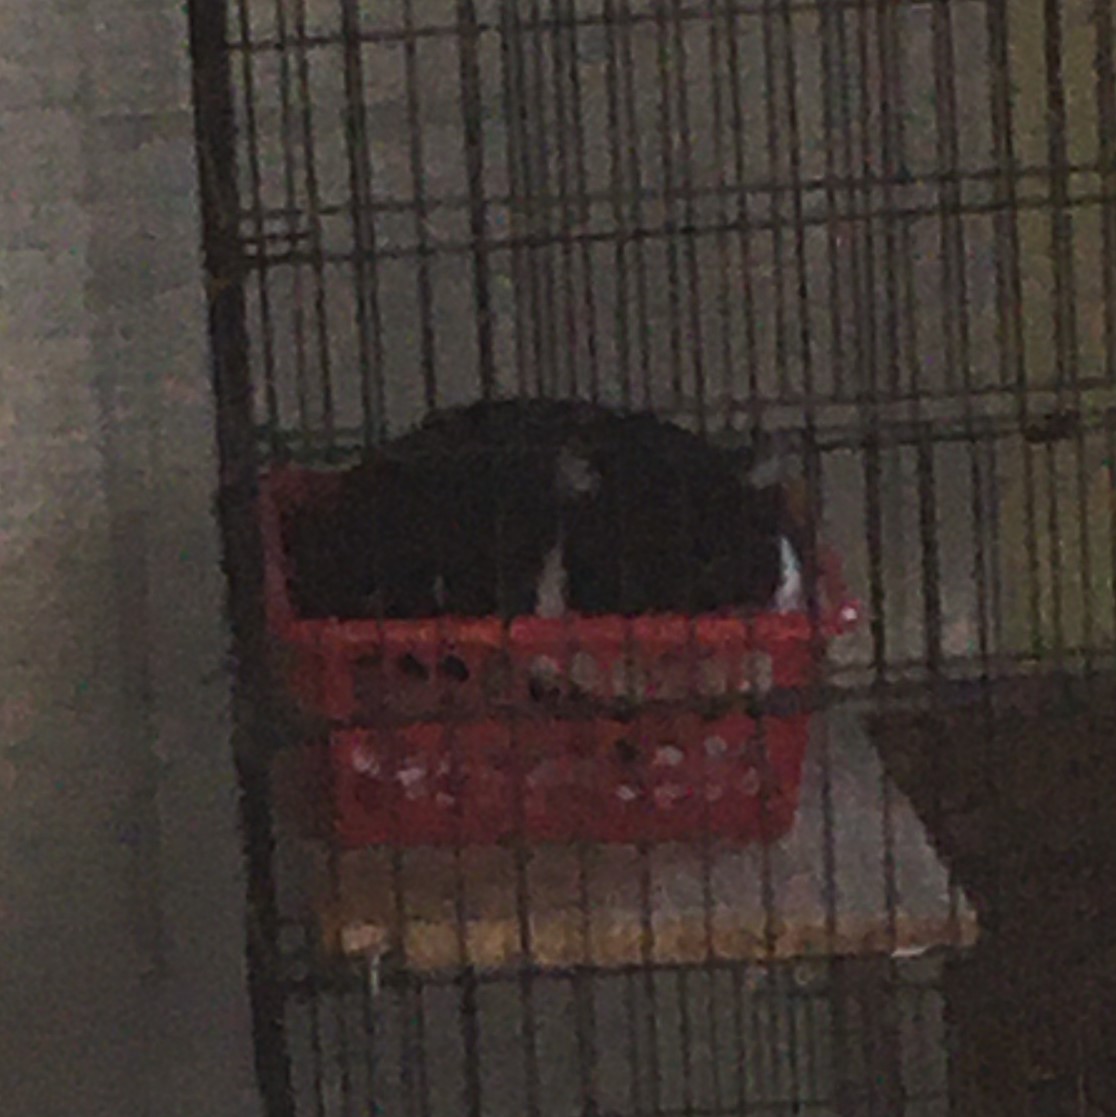 grainy image of a tuxedo cat sitting in a red basket in a cage